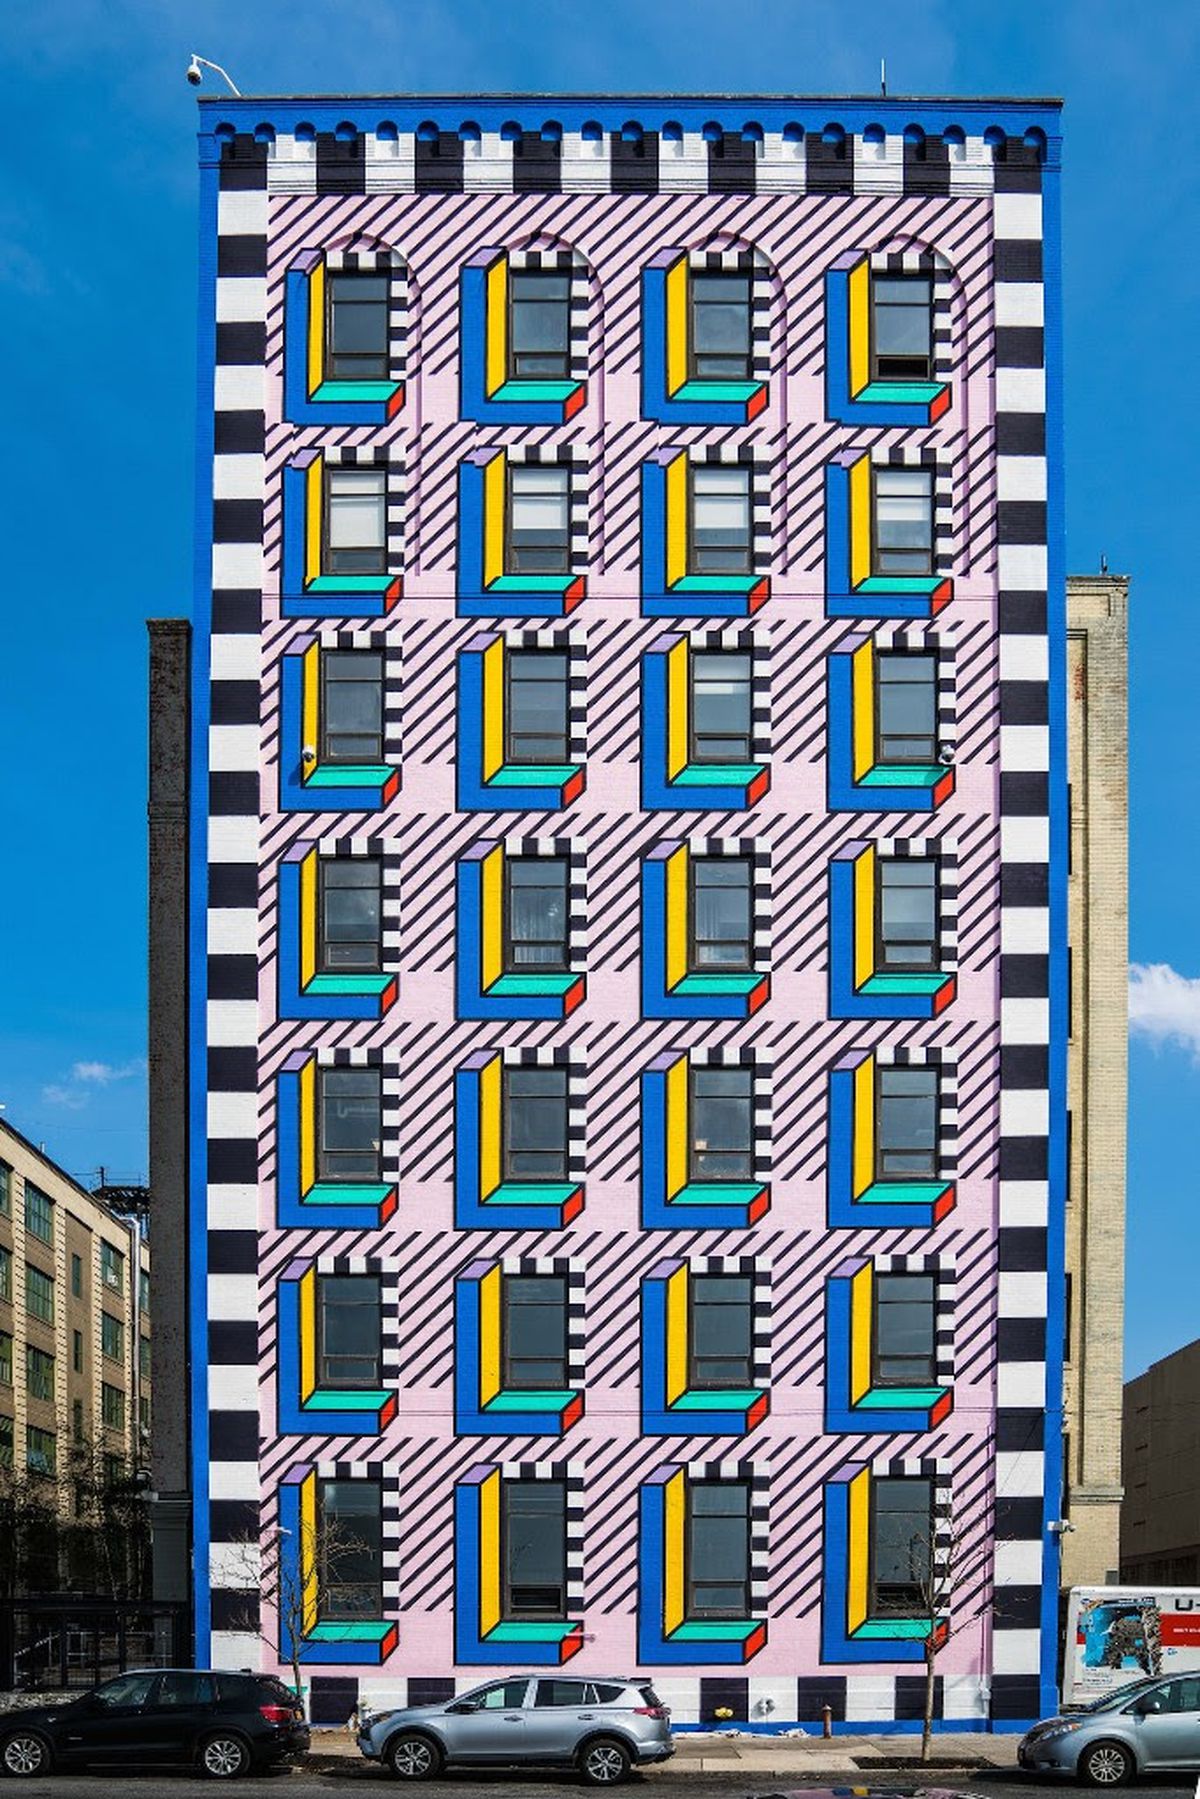 Camille Walala transforms a Brooklyn building with Memphis-inspired